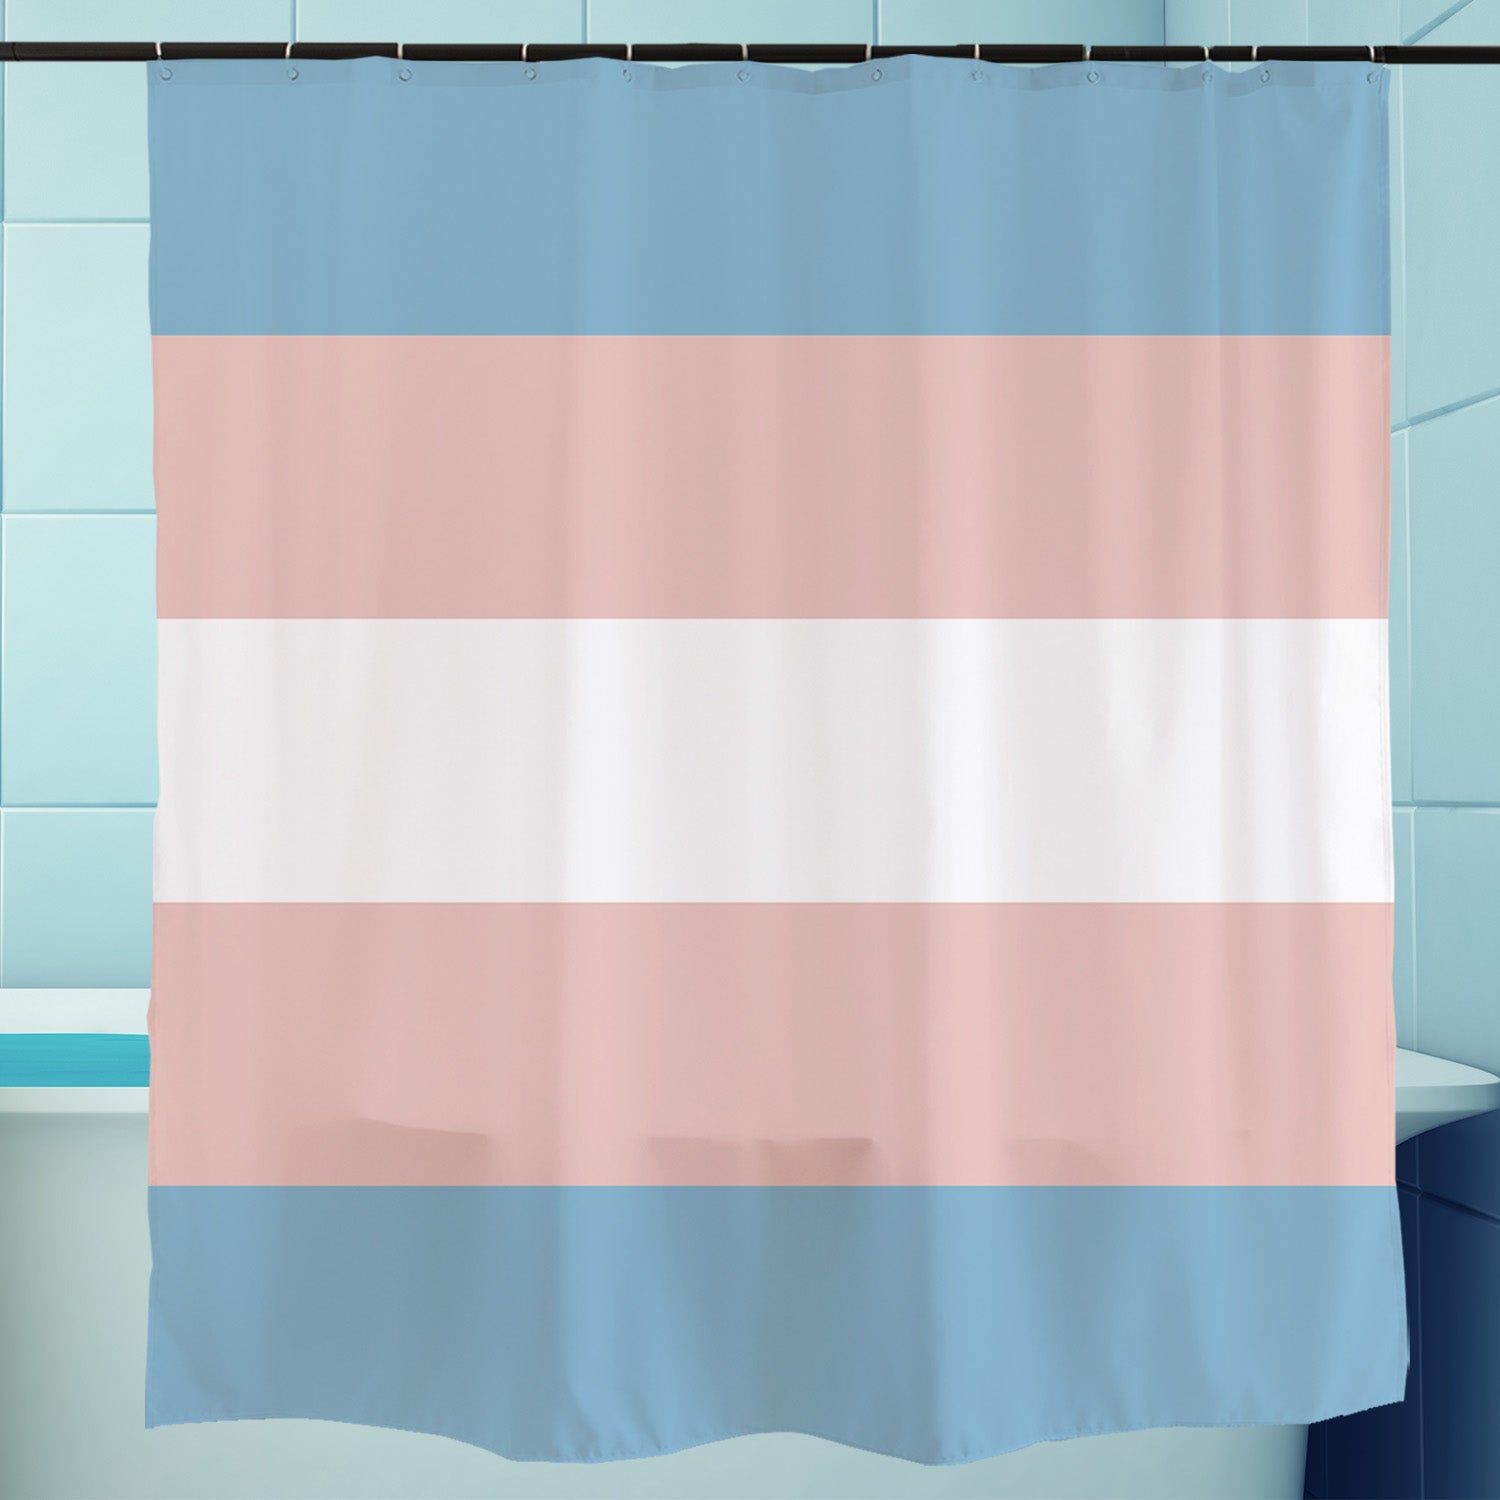 Feblilac Pink Blue White LGBT Flag Shower Curtain with Hooks